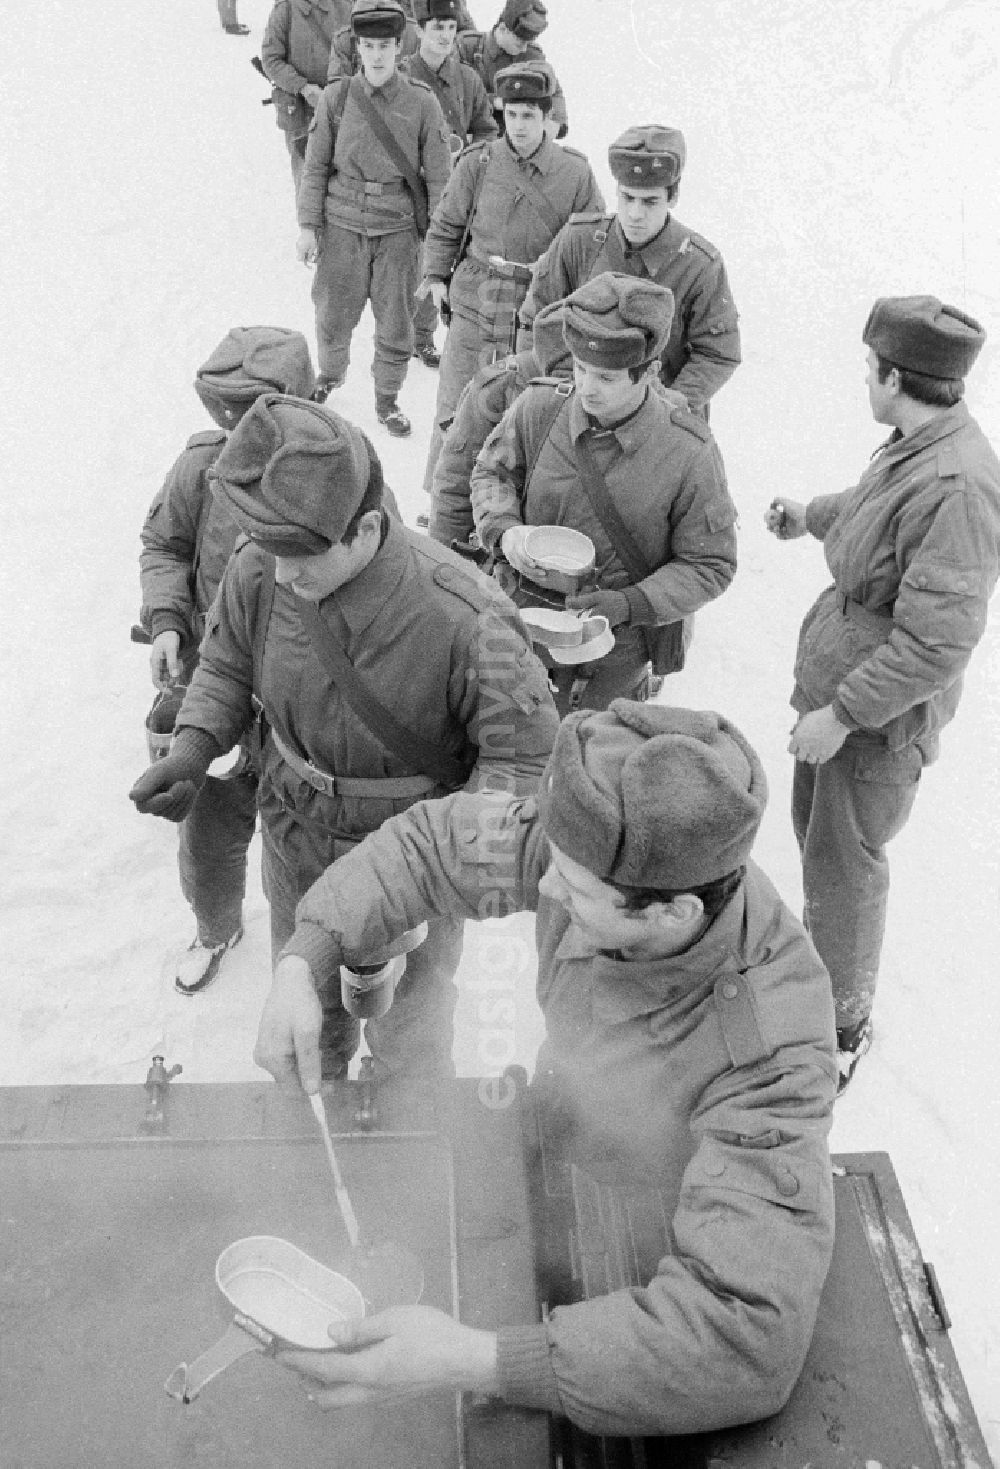 Königs Wusterhausen: Communal catering during a manoeuvre, in winter from the goulash cannon, the 2nd news regiment of the NVA in Wernsdorf in Koenigs Wusterhausen in the federal state Brandenburg in the area of the former GDR, German democratic republic